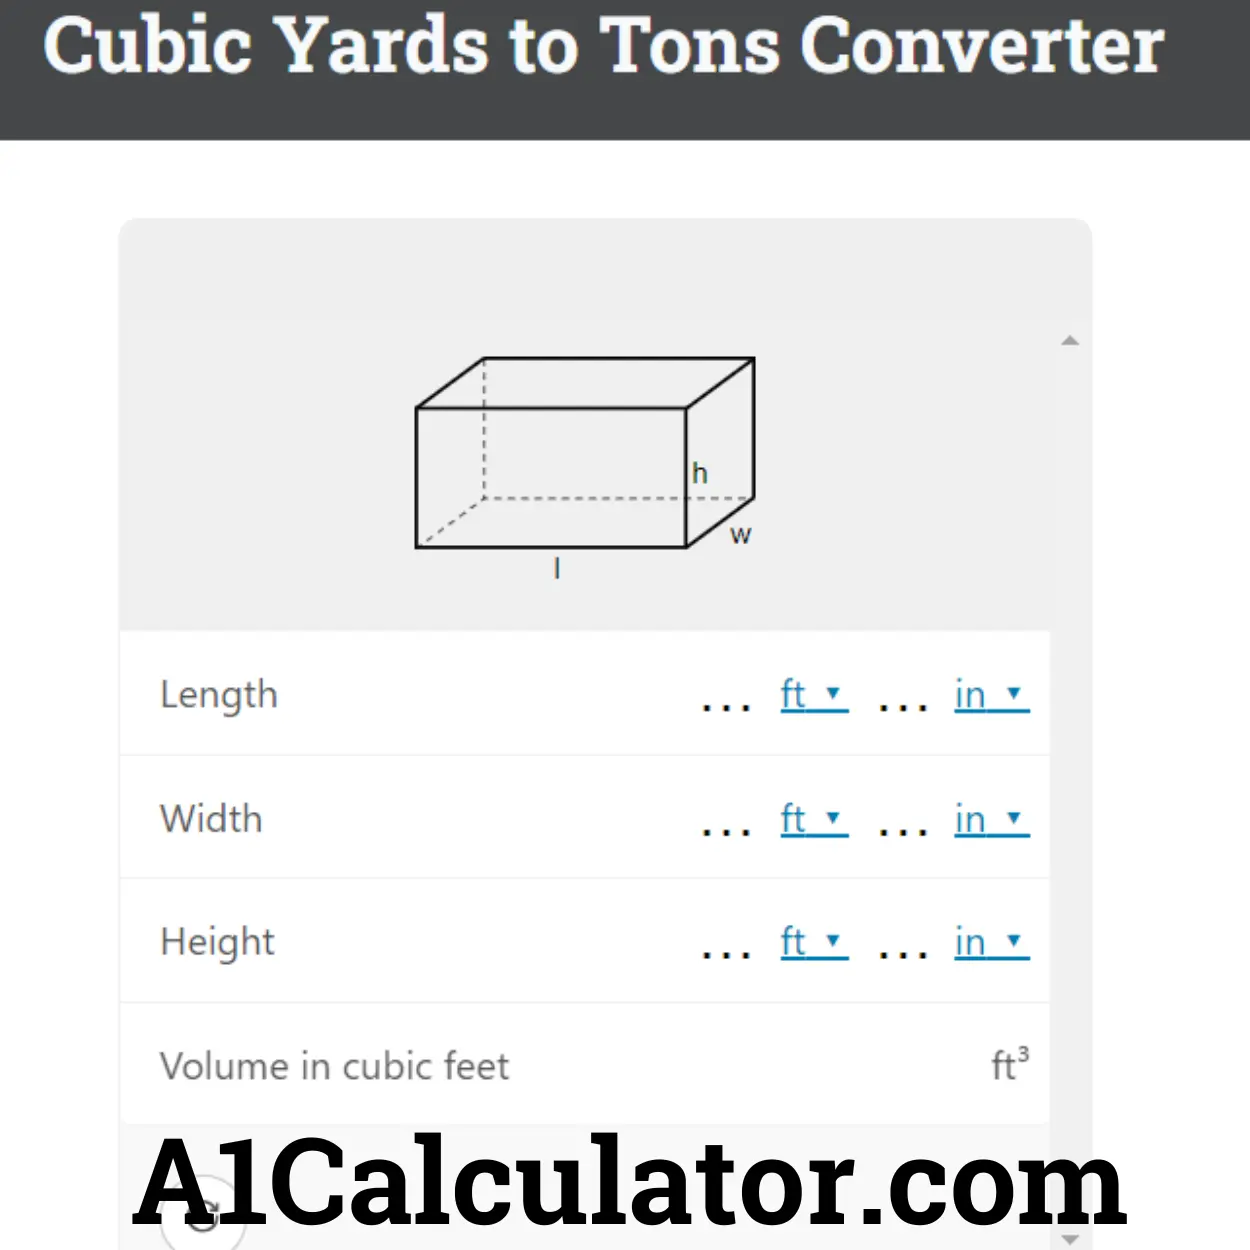 Cubic Yards To Tons Converter - A1Calculator